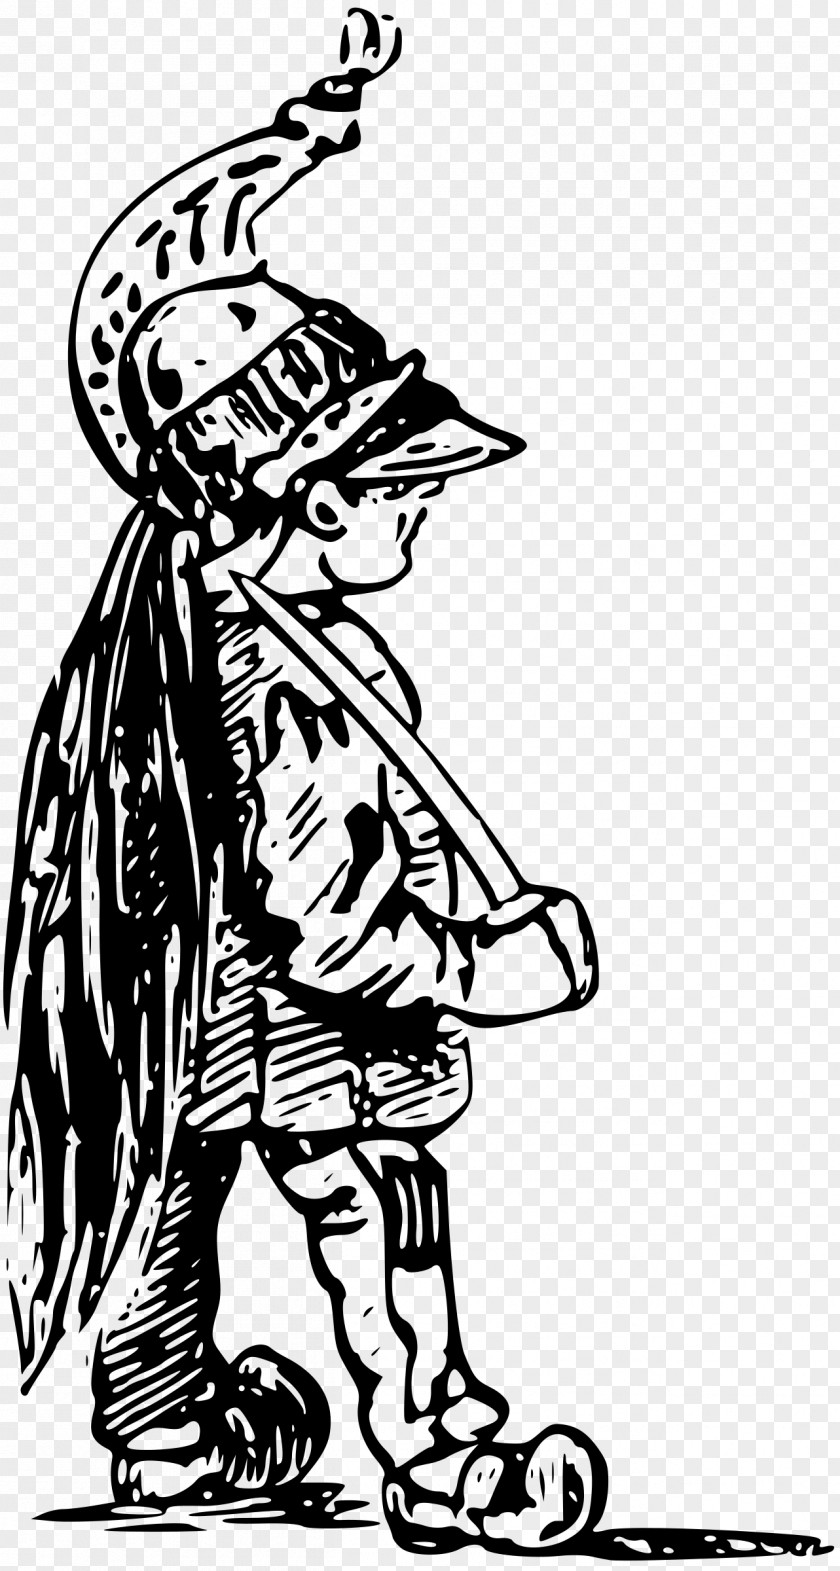 Soldier Drawing Artistic Travel In Normandy, Brittany Clip Art PNG